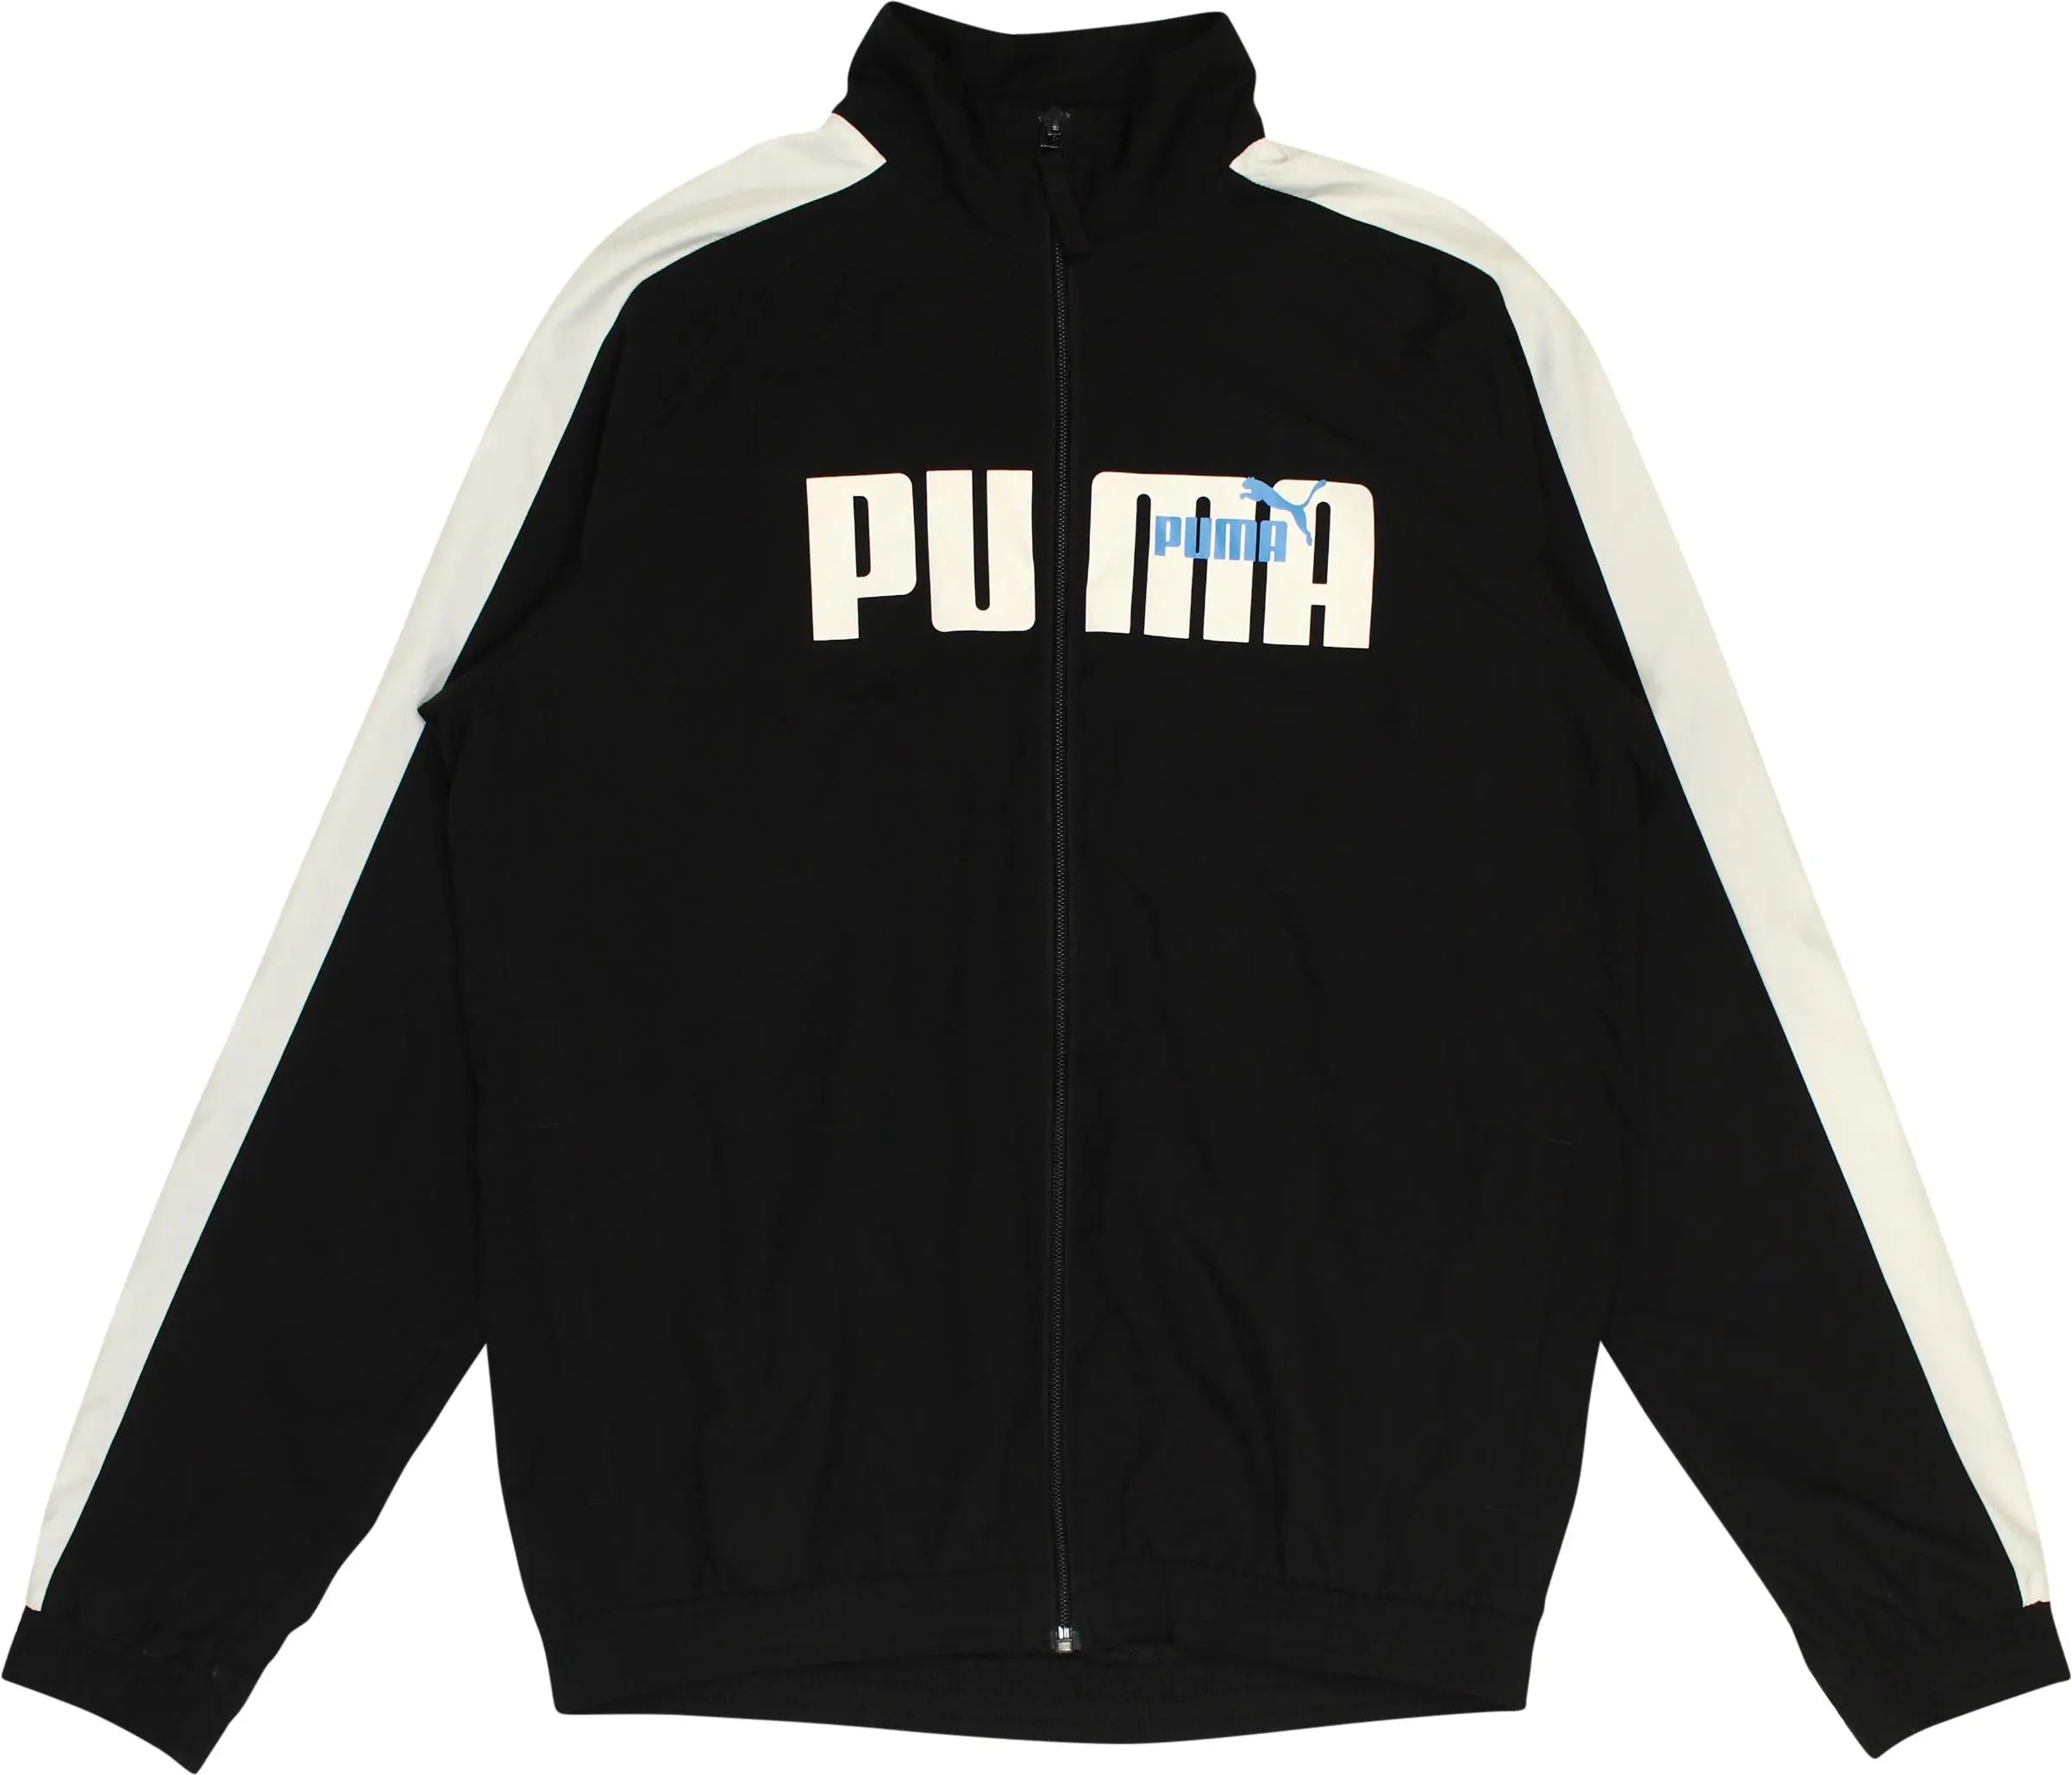 Puma - Black Track Jacket by Puma- ThriftTale.com - Vintage and second handclothing